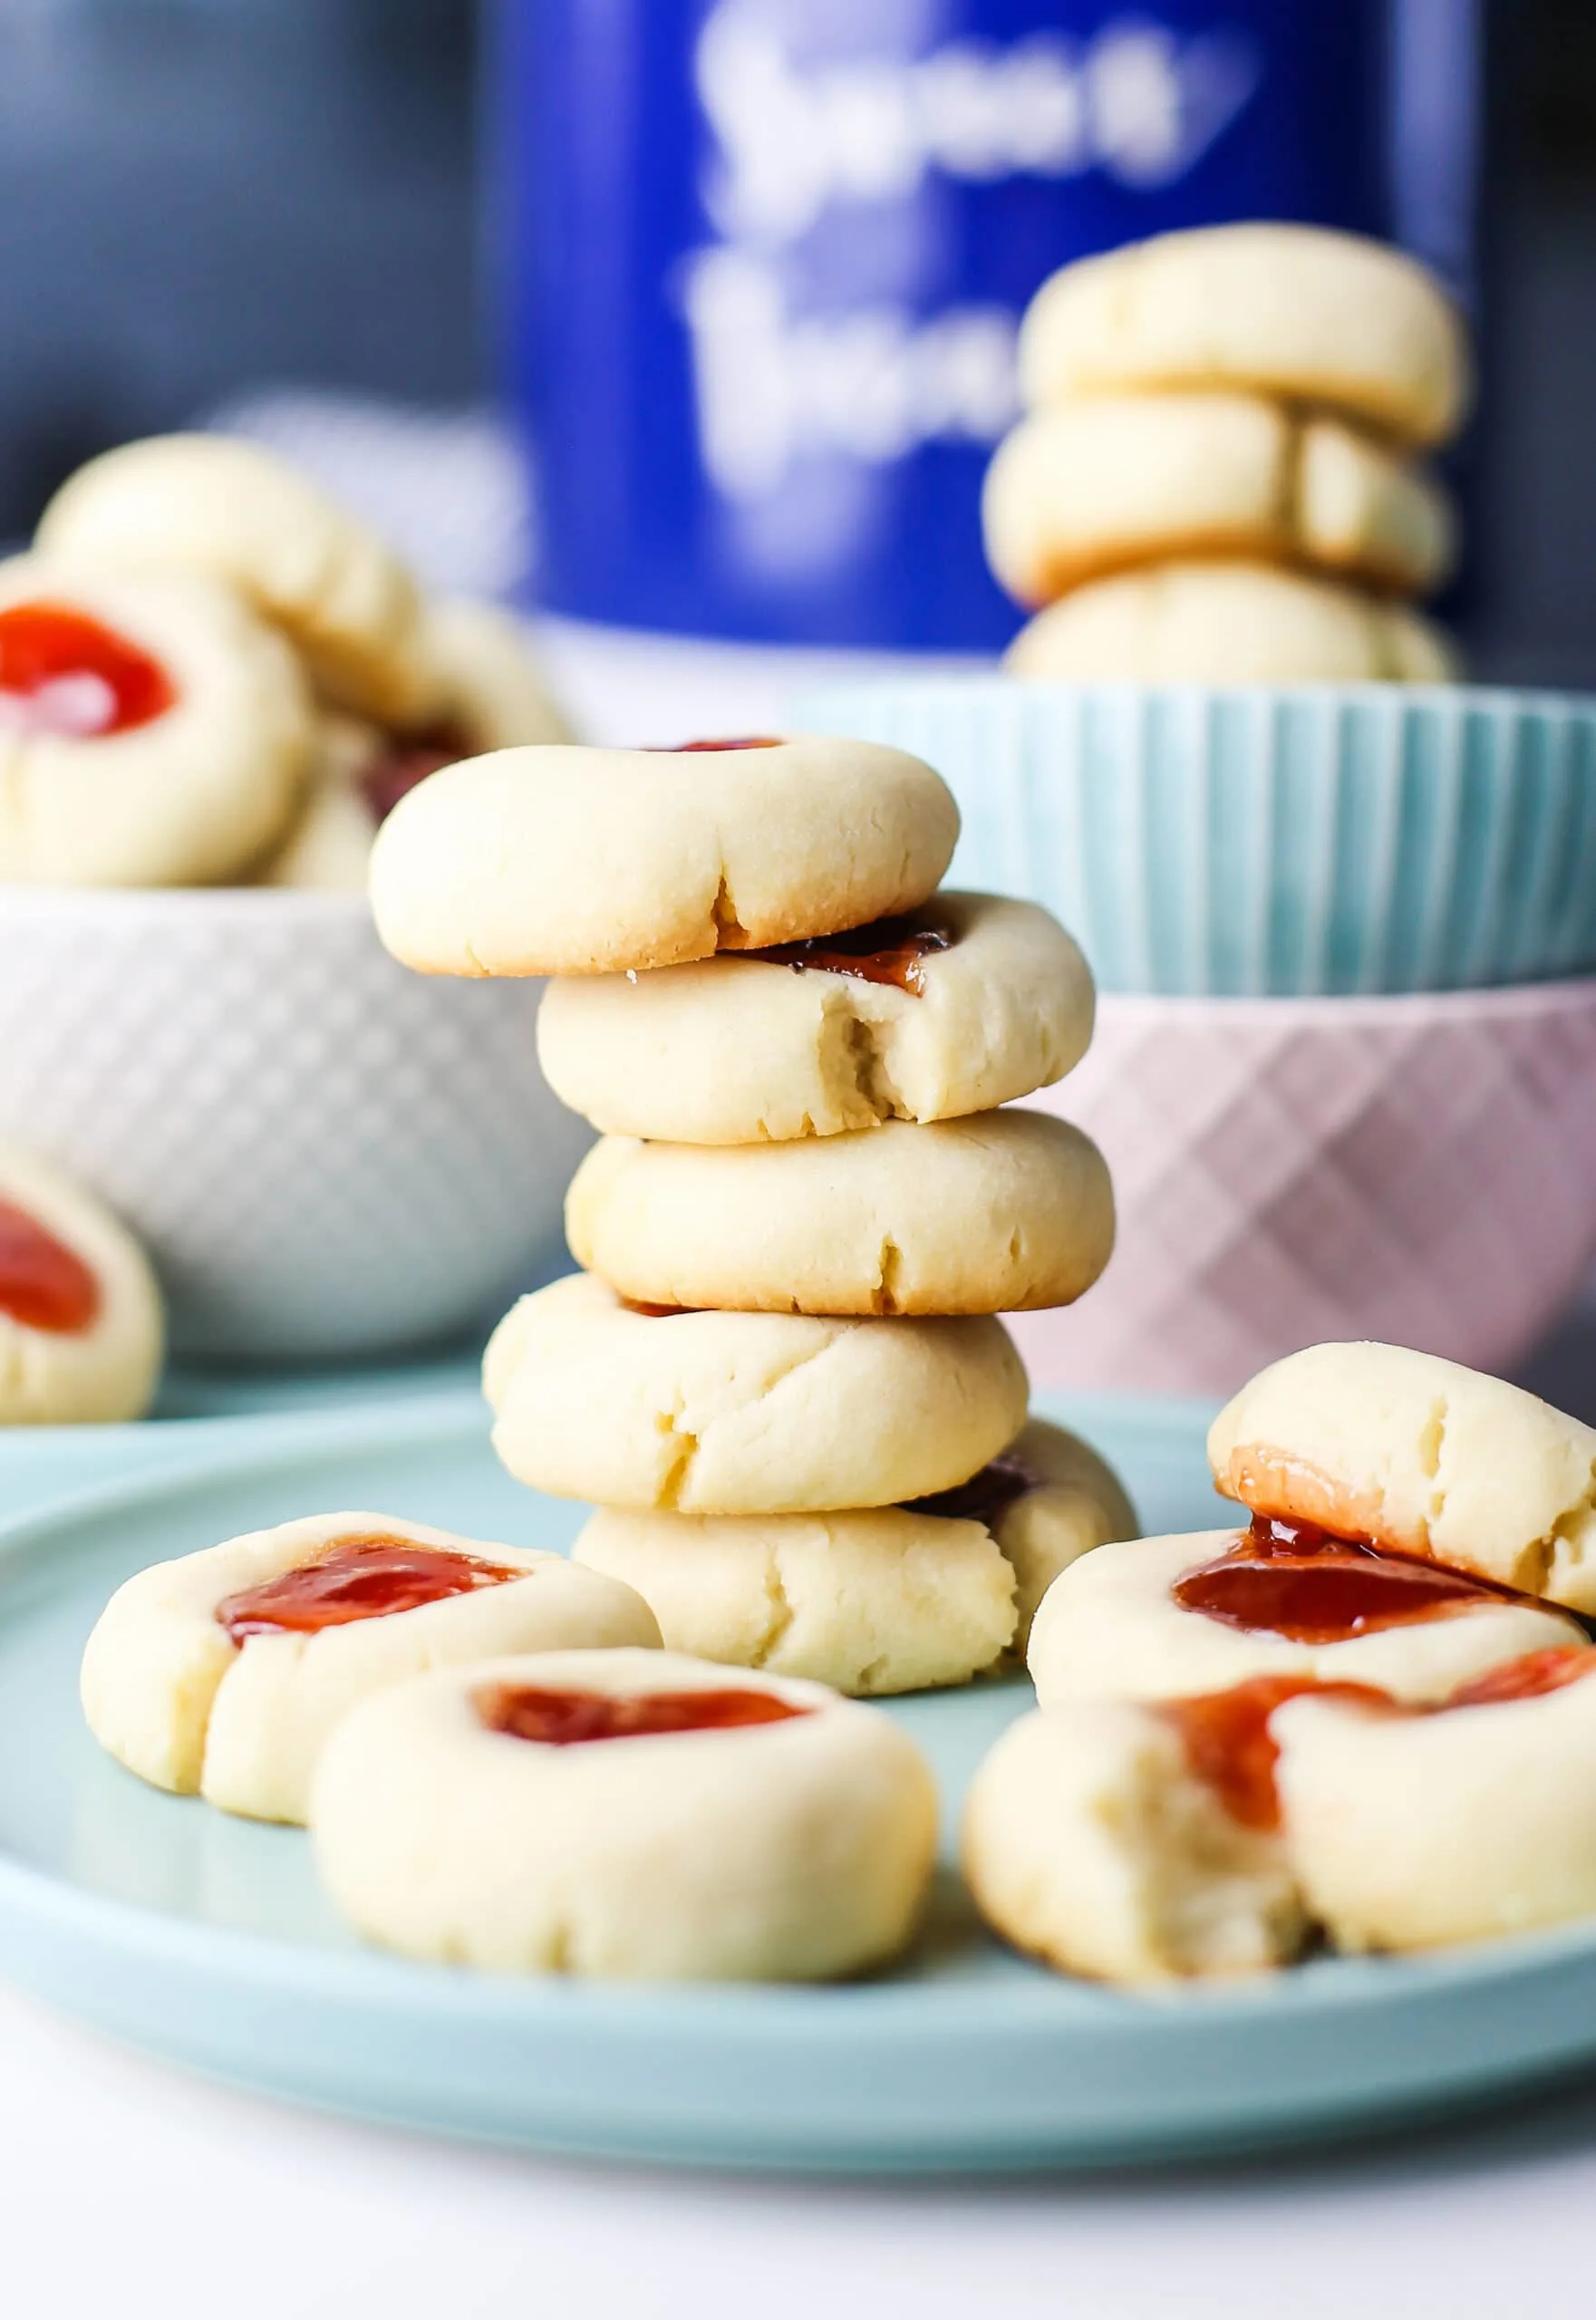 Five stacked Condensed Milk Thumbprint Cookies on a blue plate surrounded by more cookies.